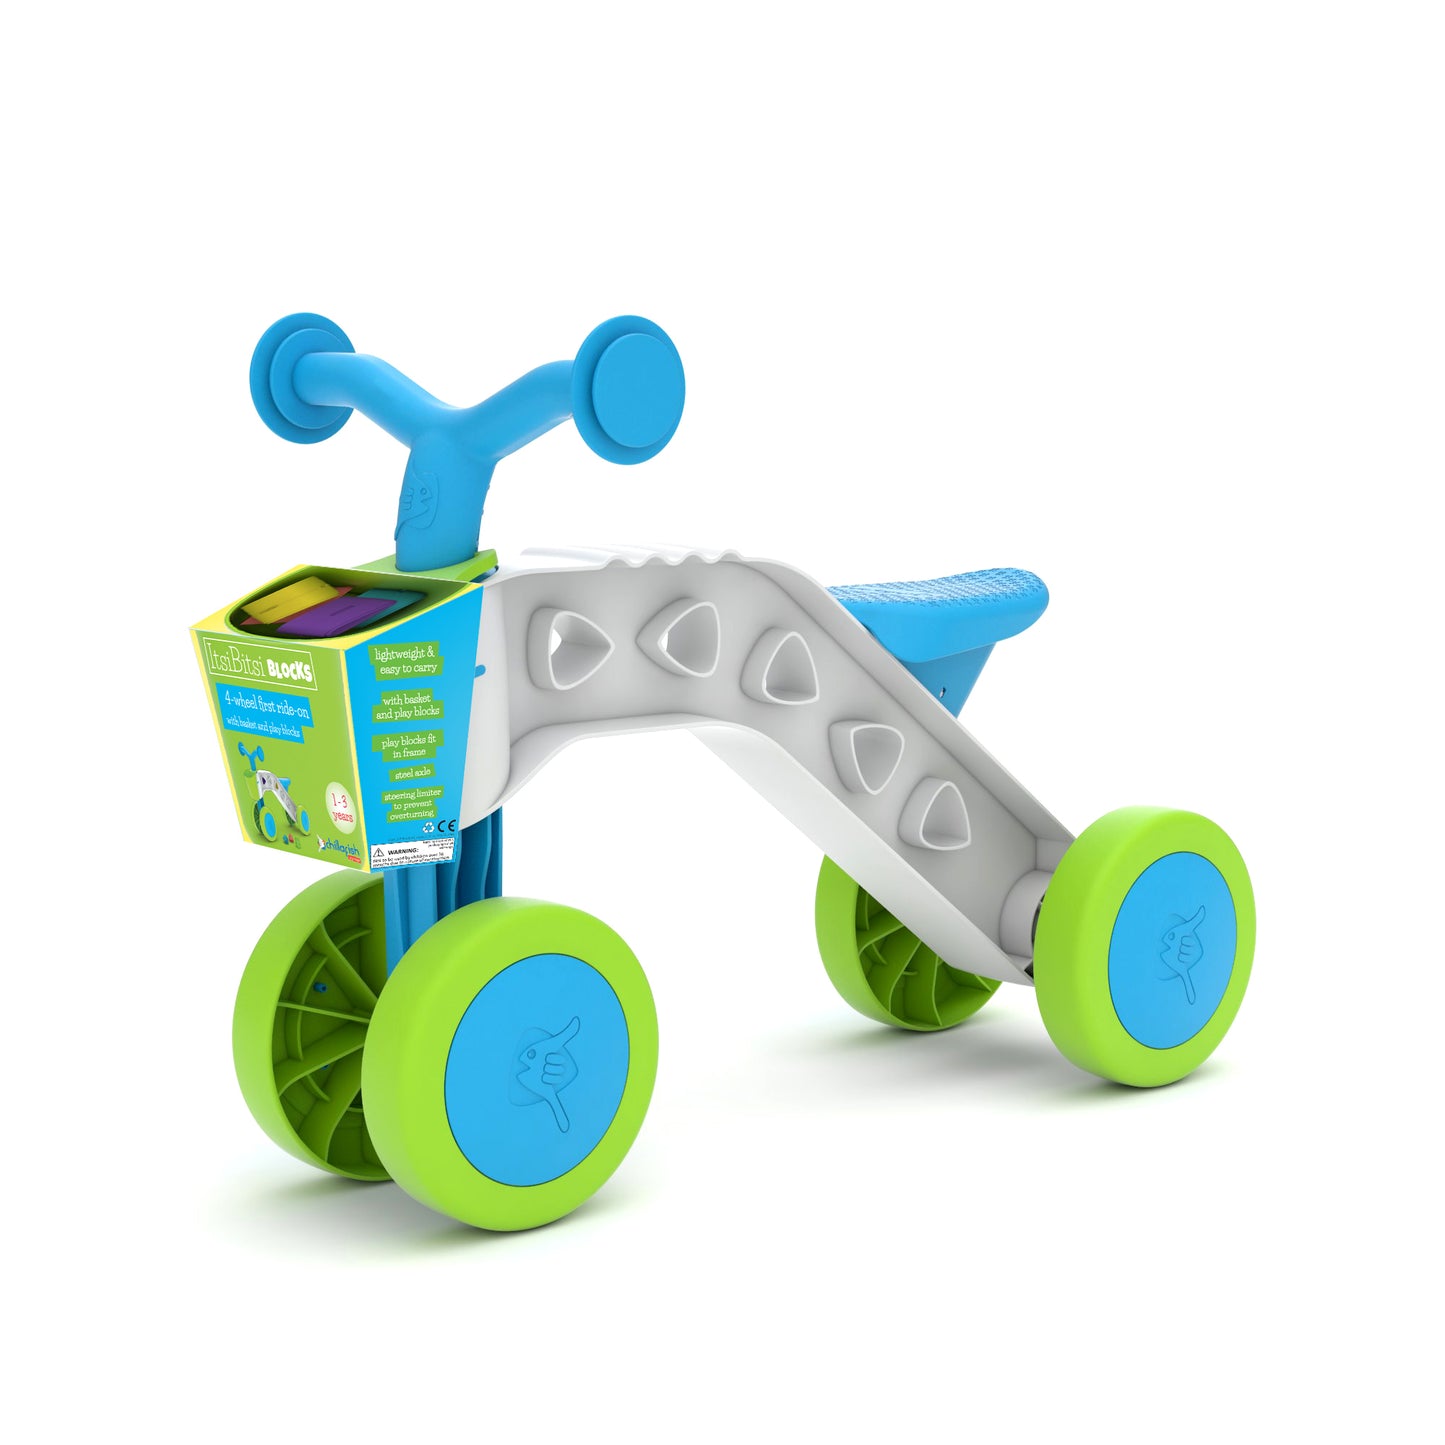 ItsiBitsi Blocks ride-on with storage basket and play blocks that fit in frame